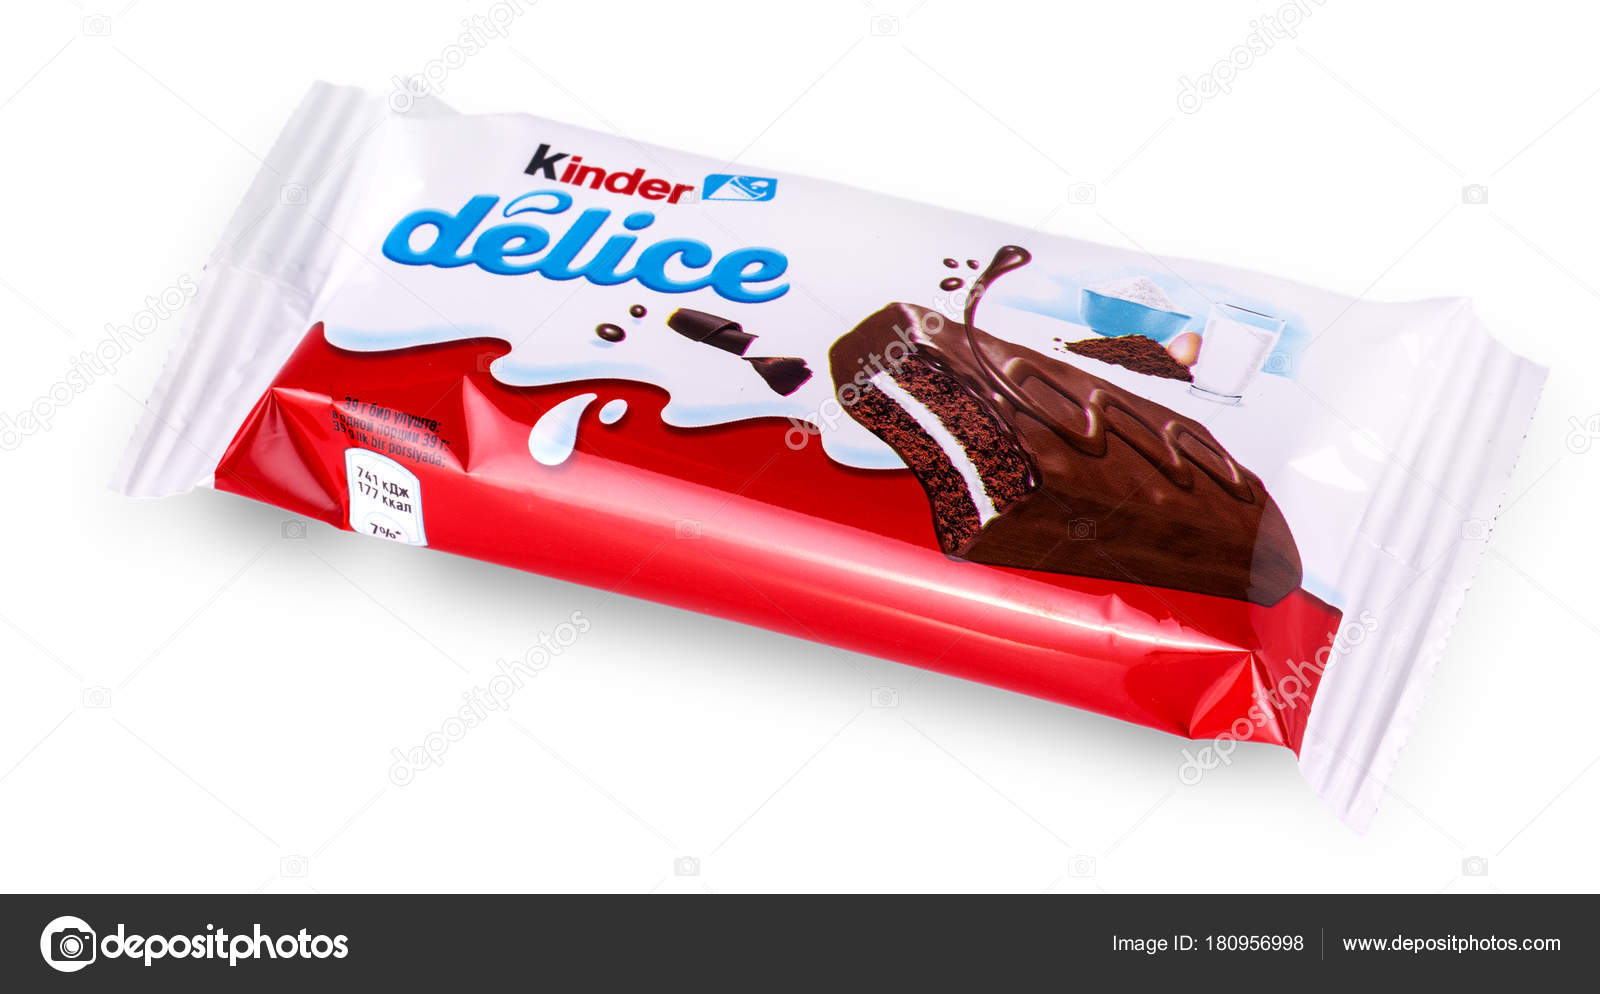 Kinder Delice snack made from milk – Stock Editorial Photo © bborriss.67  #180956998